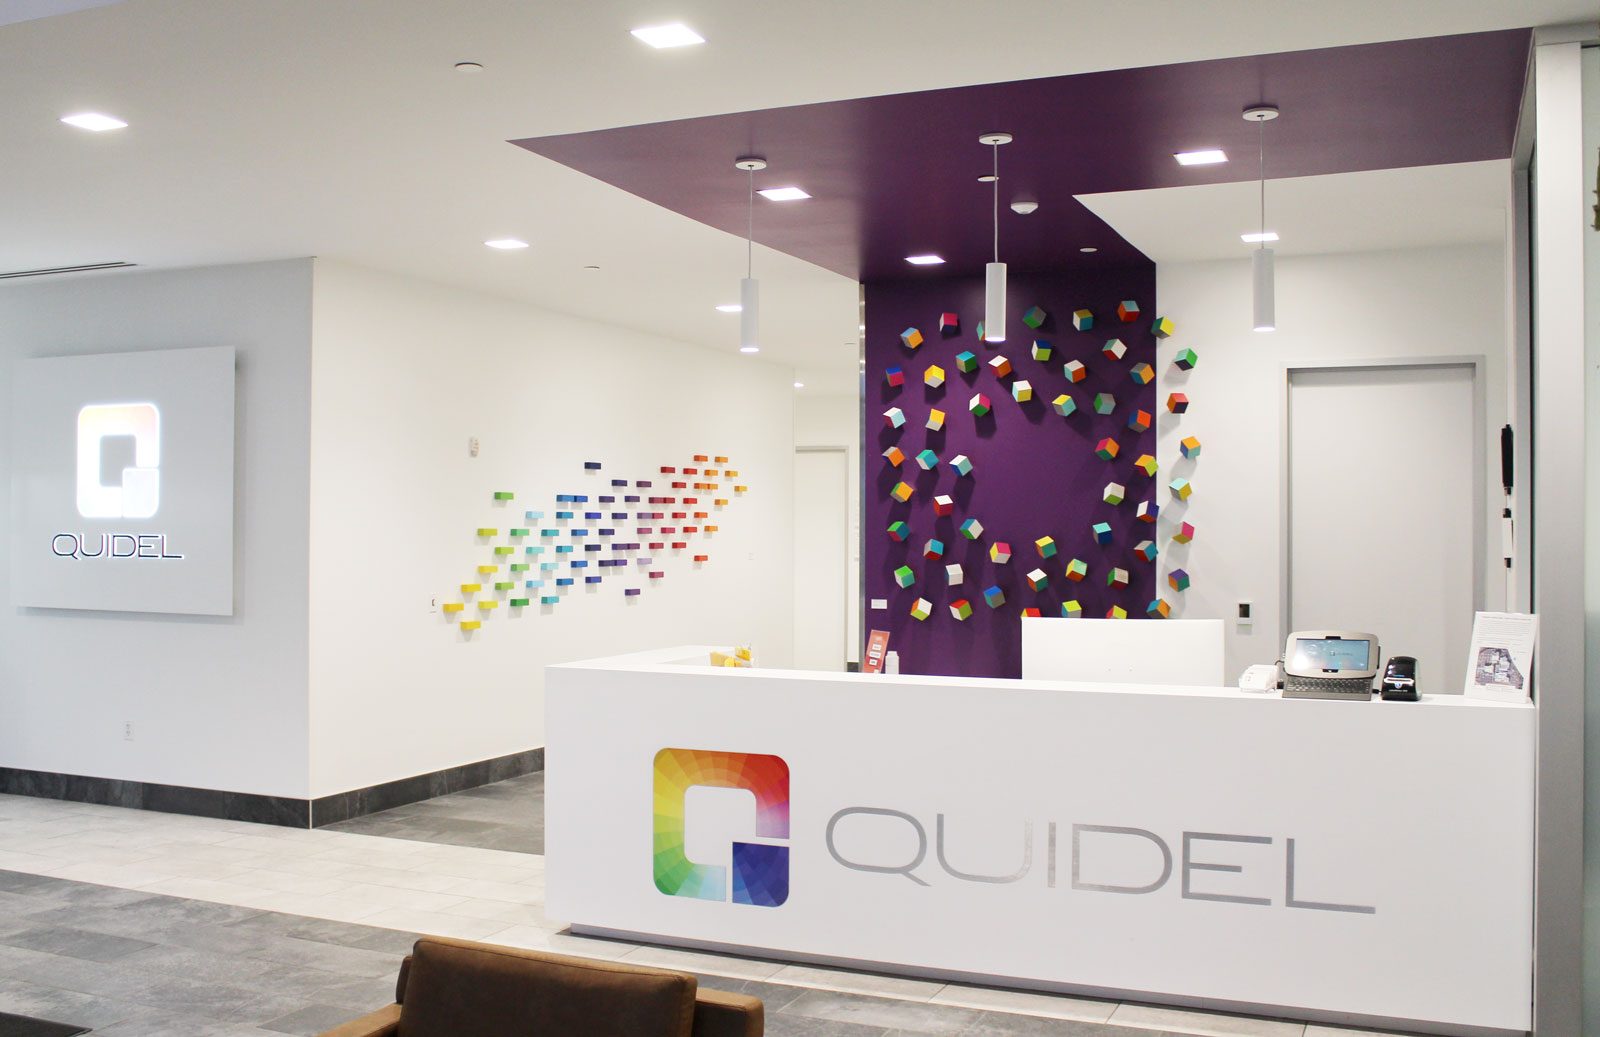 quidel building A reception area and signage 2 hughes marino project